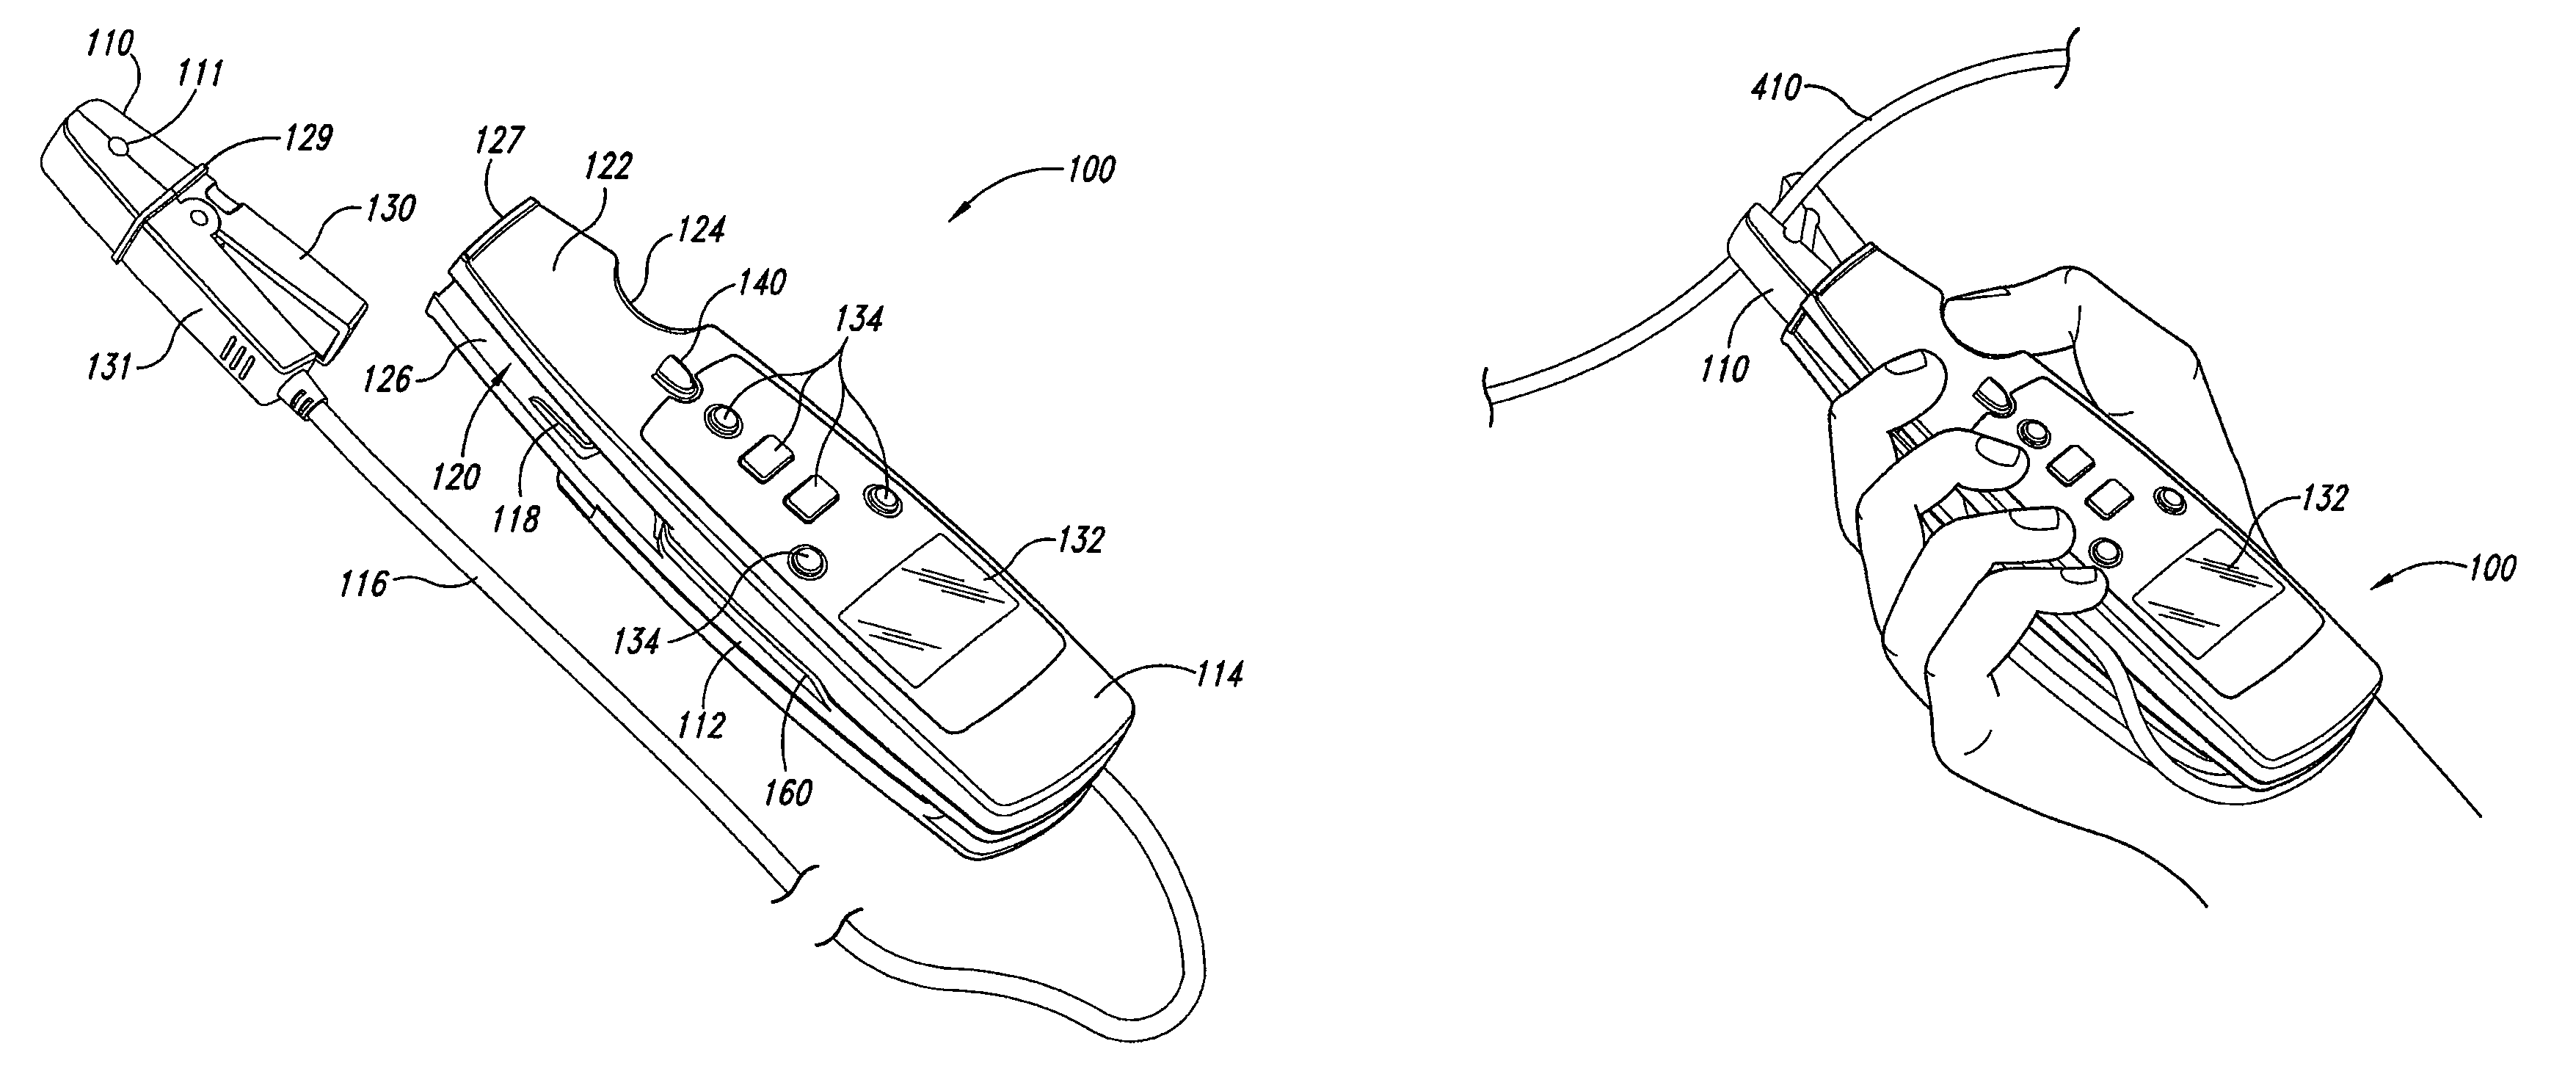 Electrical measuring instrument having detachable current clamp